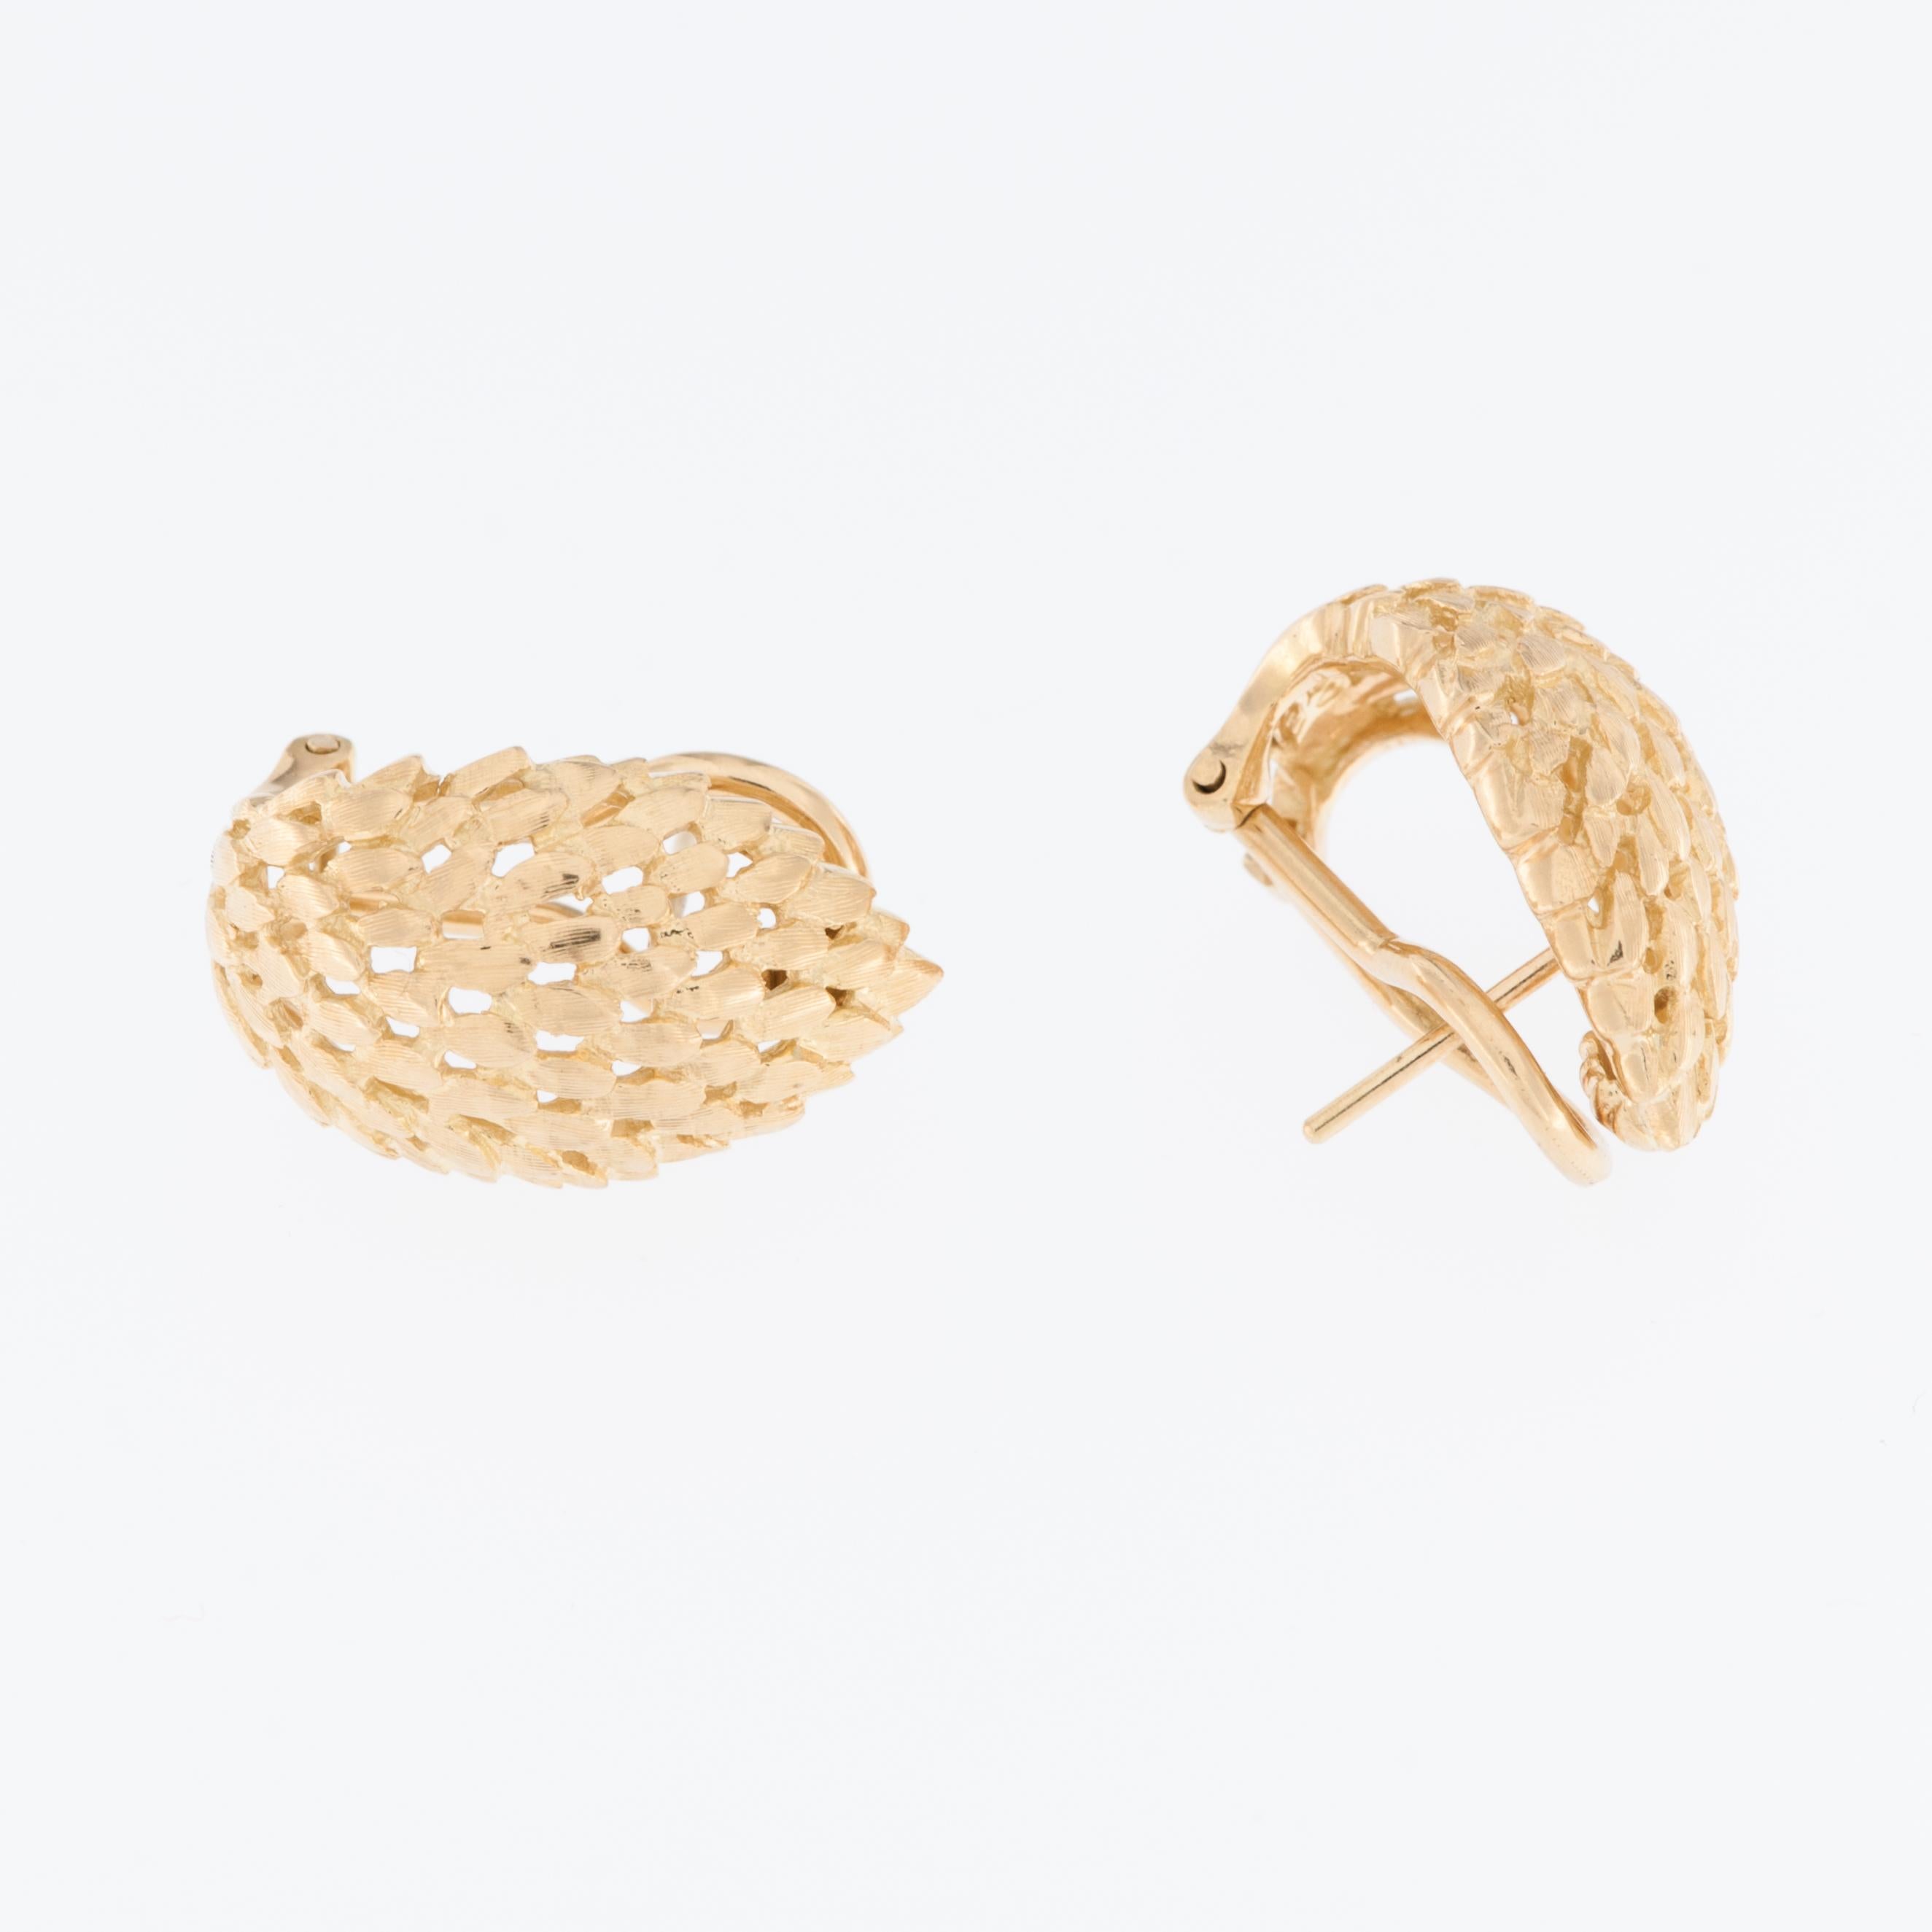 These Italian 18kt Yellow Gold Feather Shape Earrings are exquisite pieces of jewelry that exude elegance and style. They are crafted from high-quality 18-karat yellow gold. This material is known for its durability, luxurious appearance, and